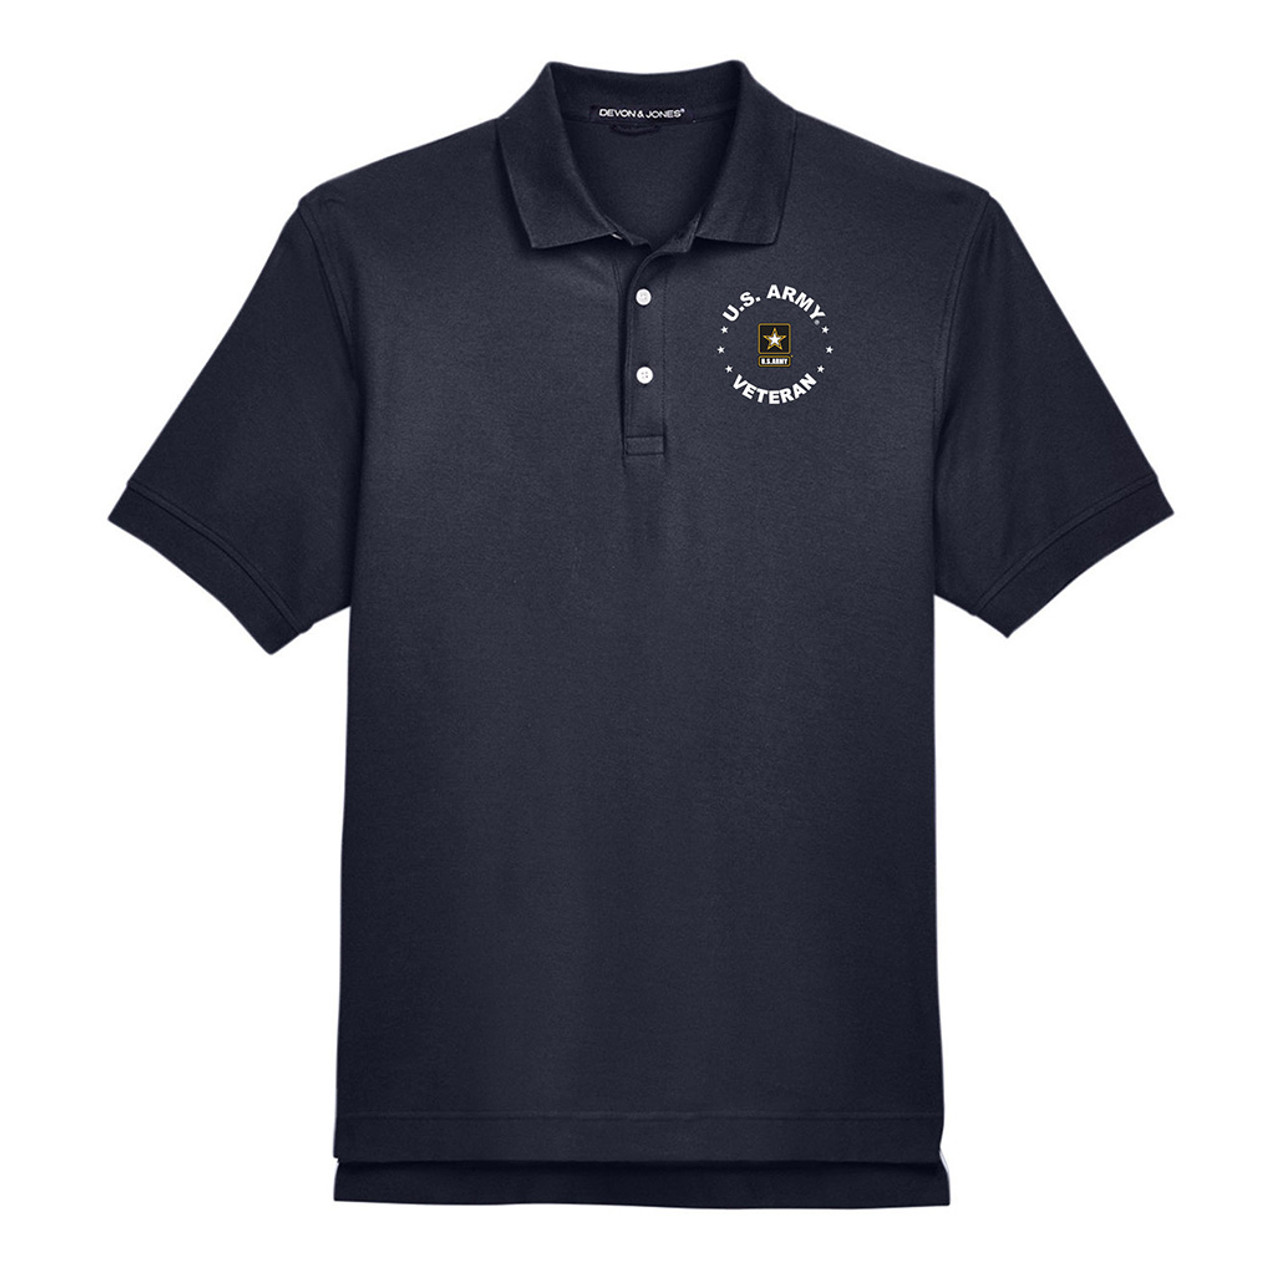 Officially Licensed U.S. Army Logo with Stars Veteran Polo on a black polo with black gold and white embroidery